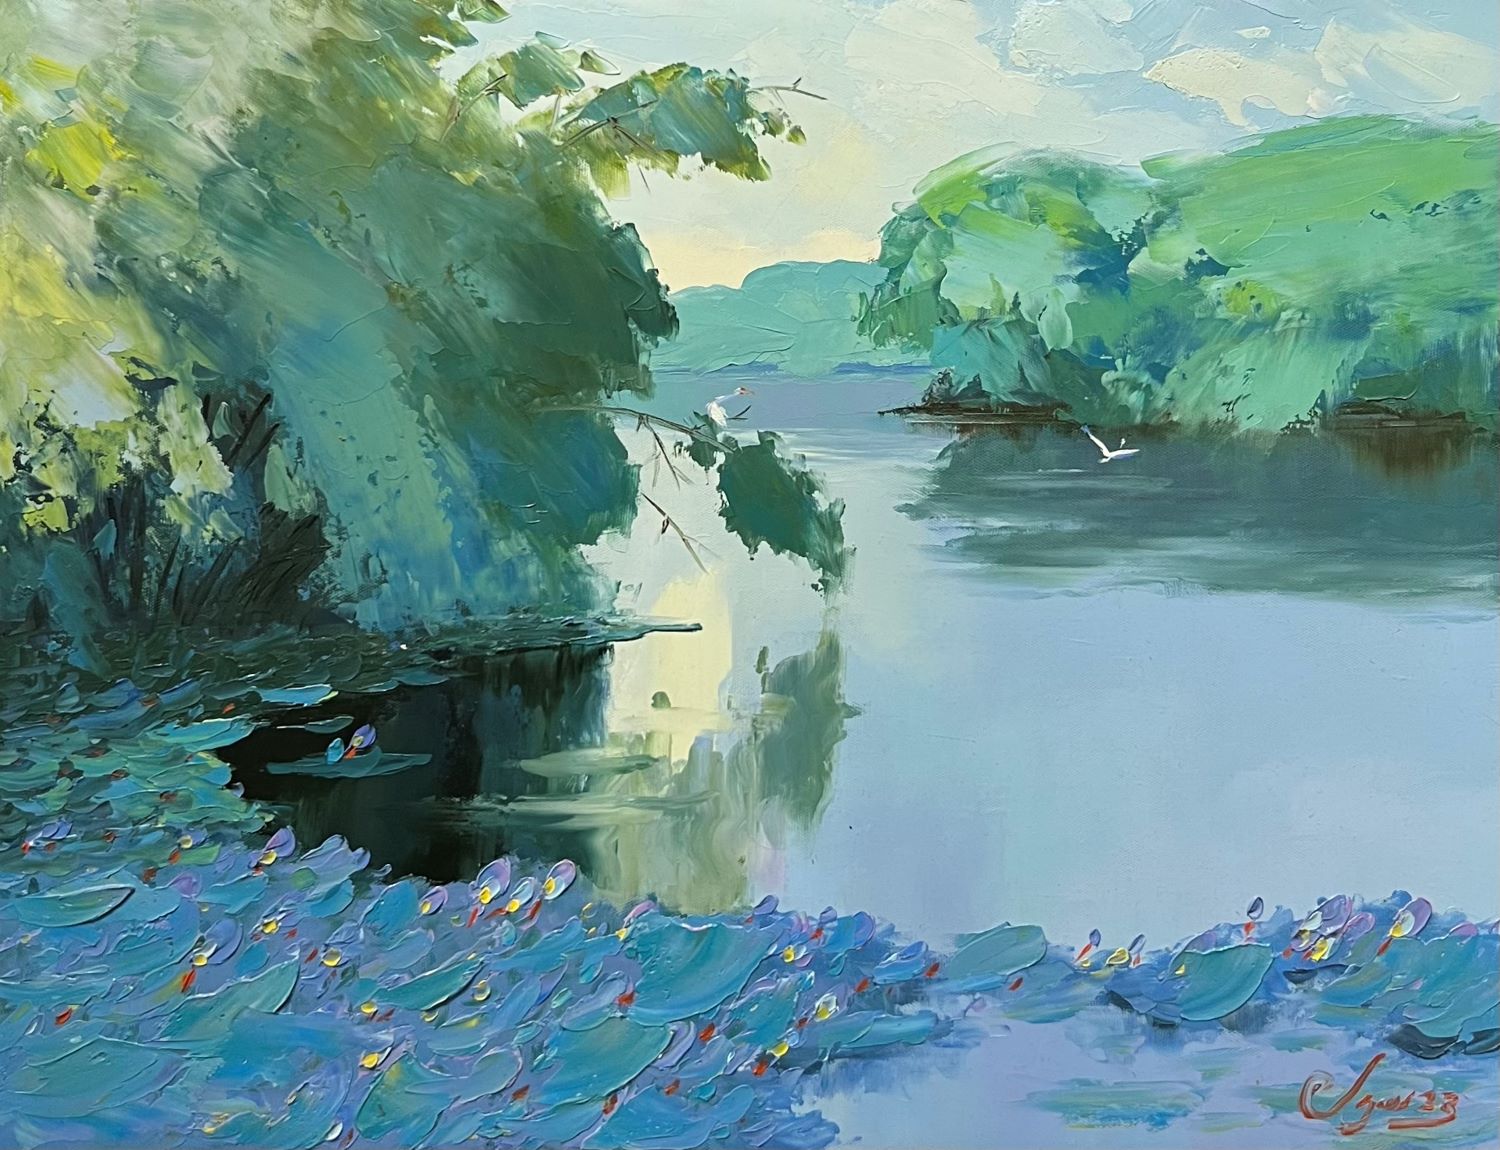 Pond in Autumn VI - Vietnamese Oil Painting by Artist Dang Dinh Ngo